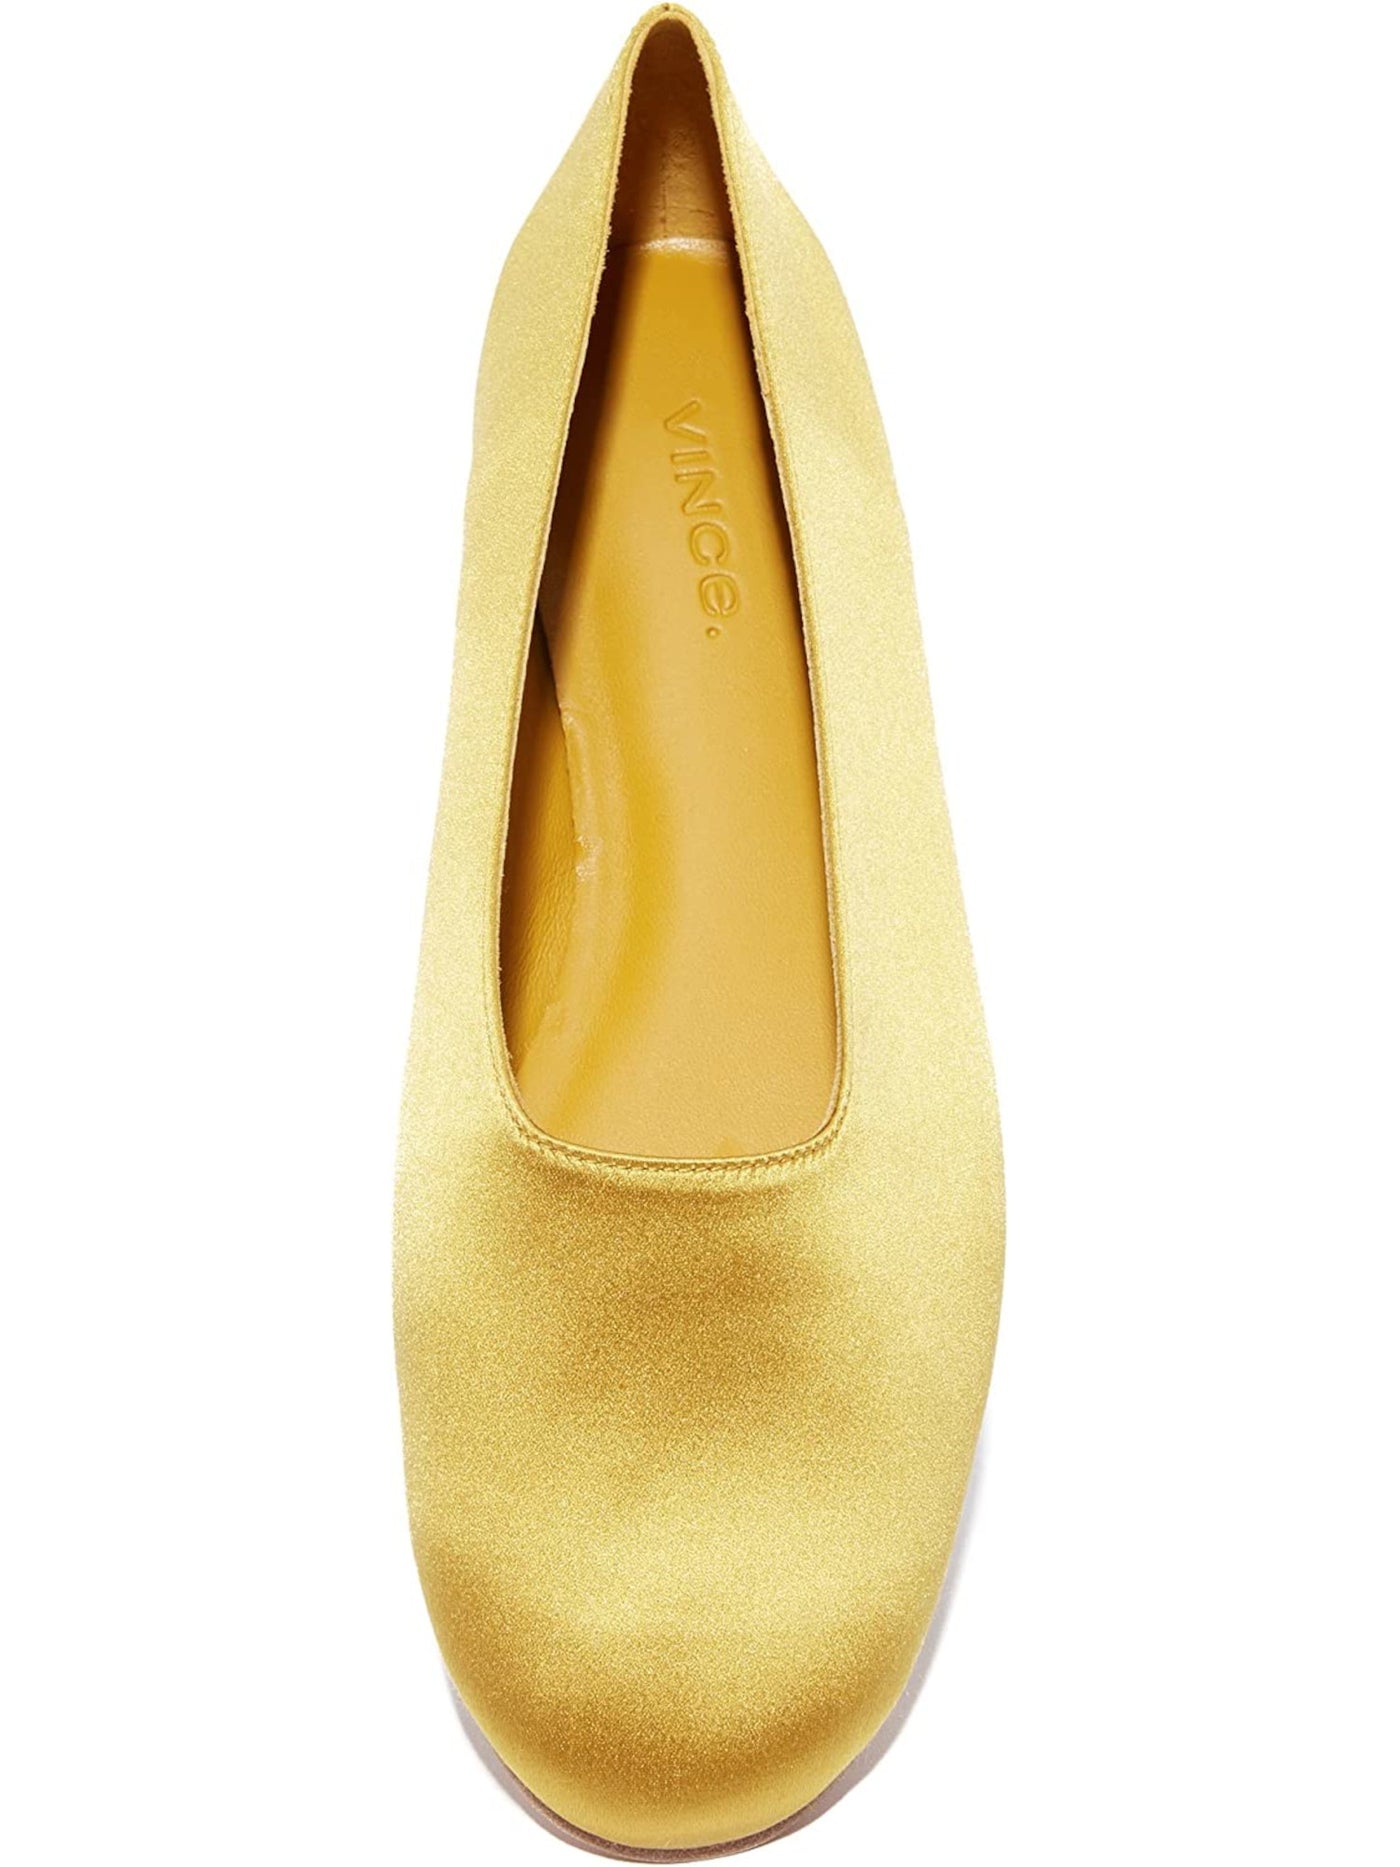 VINCE. Womens Fawn Yellow Padded Maxwell Round Toe Slip On Dress Flats Shoes M